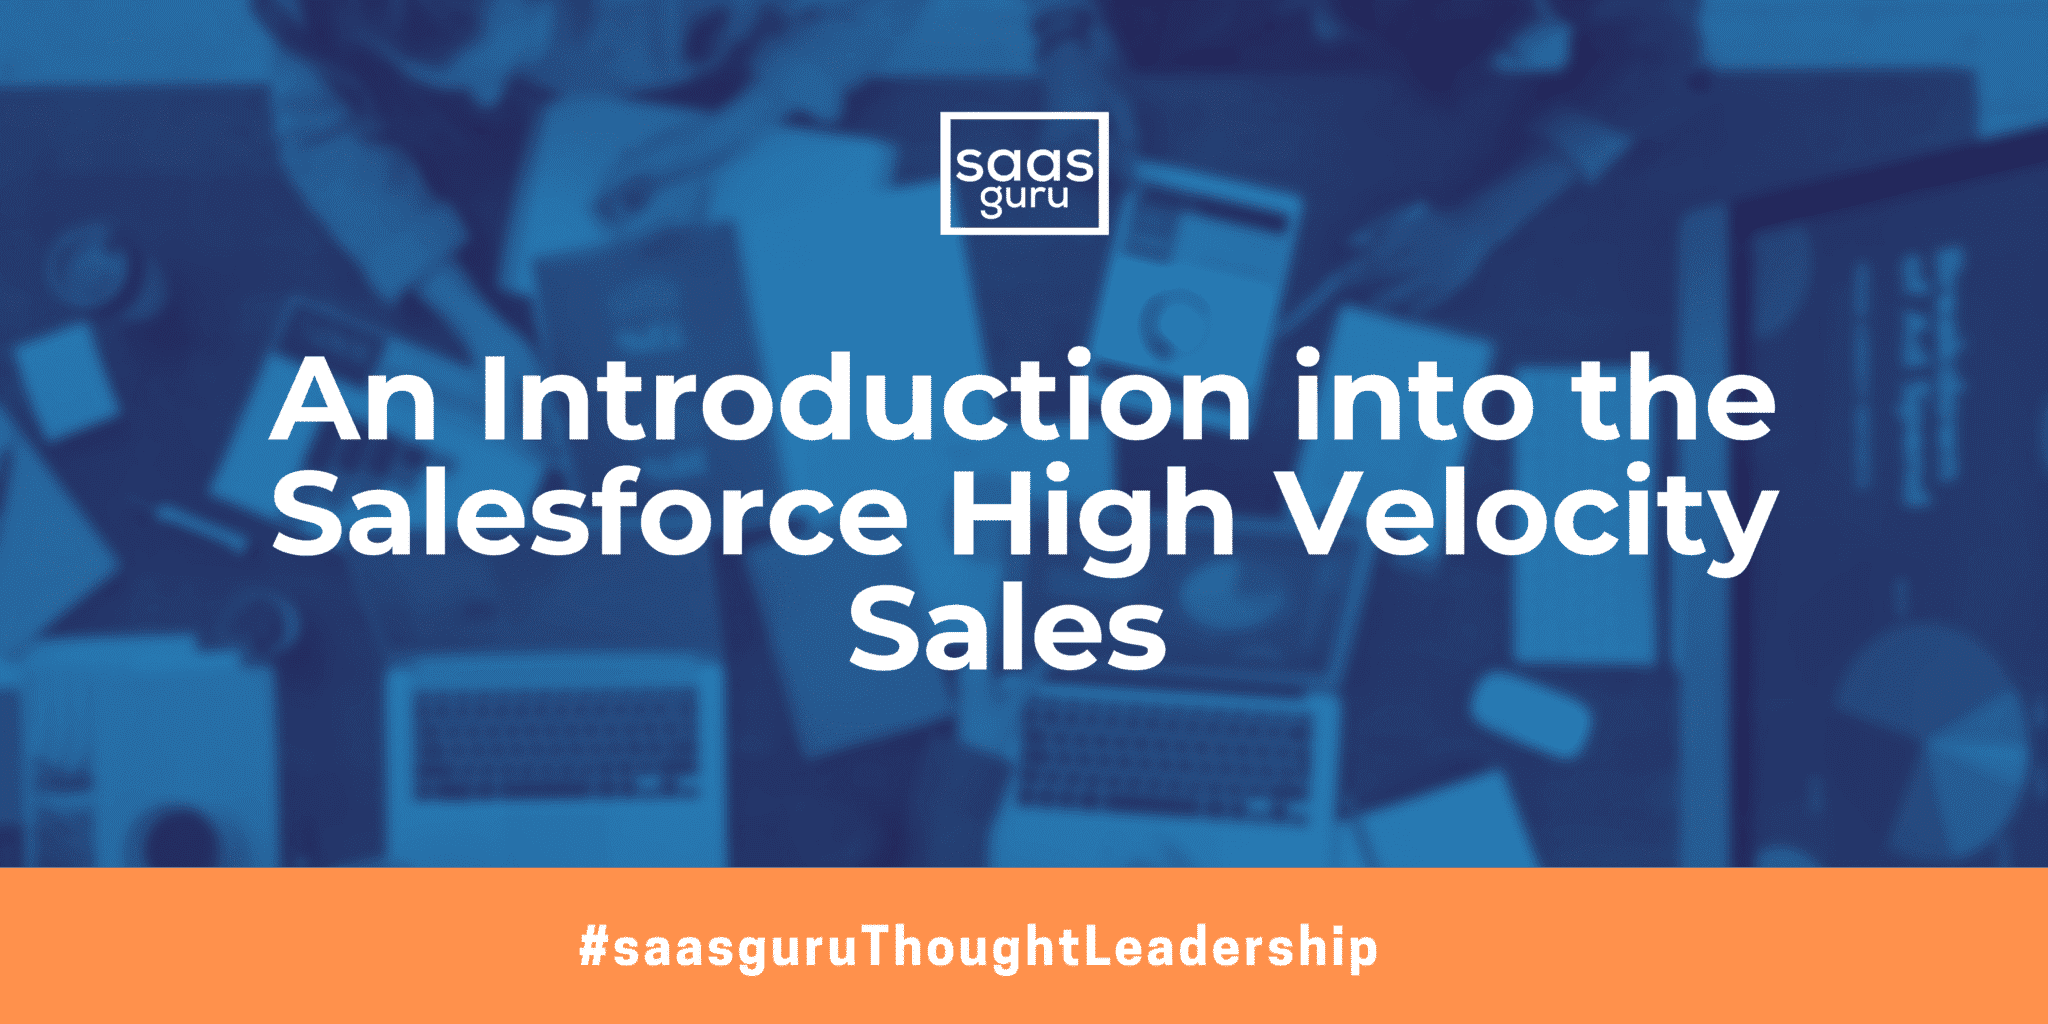 High Velocity Sales: What it is, why it matters & how to do it right